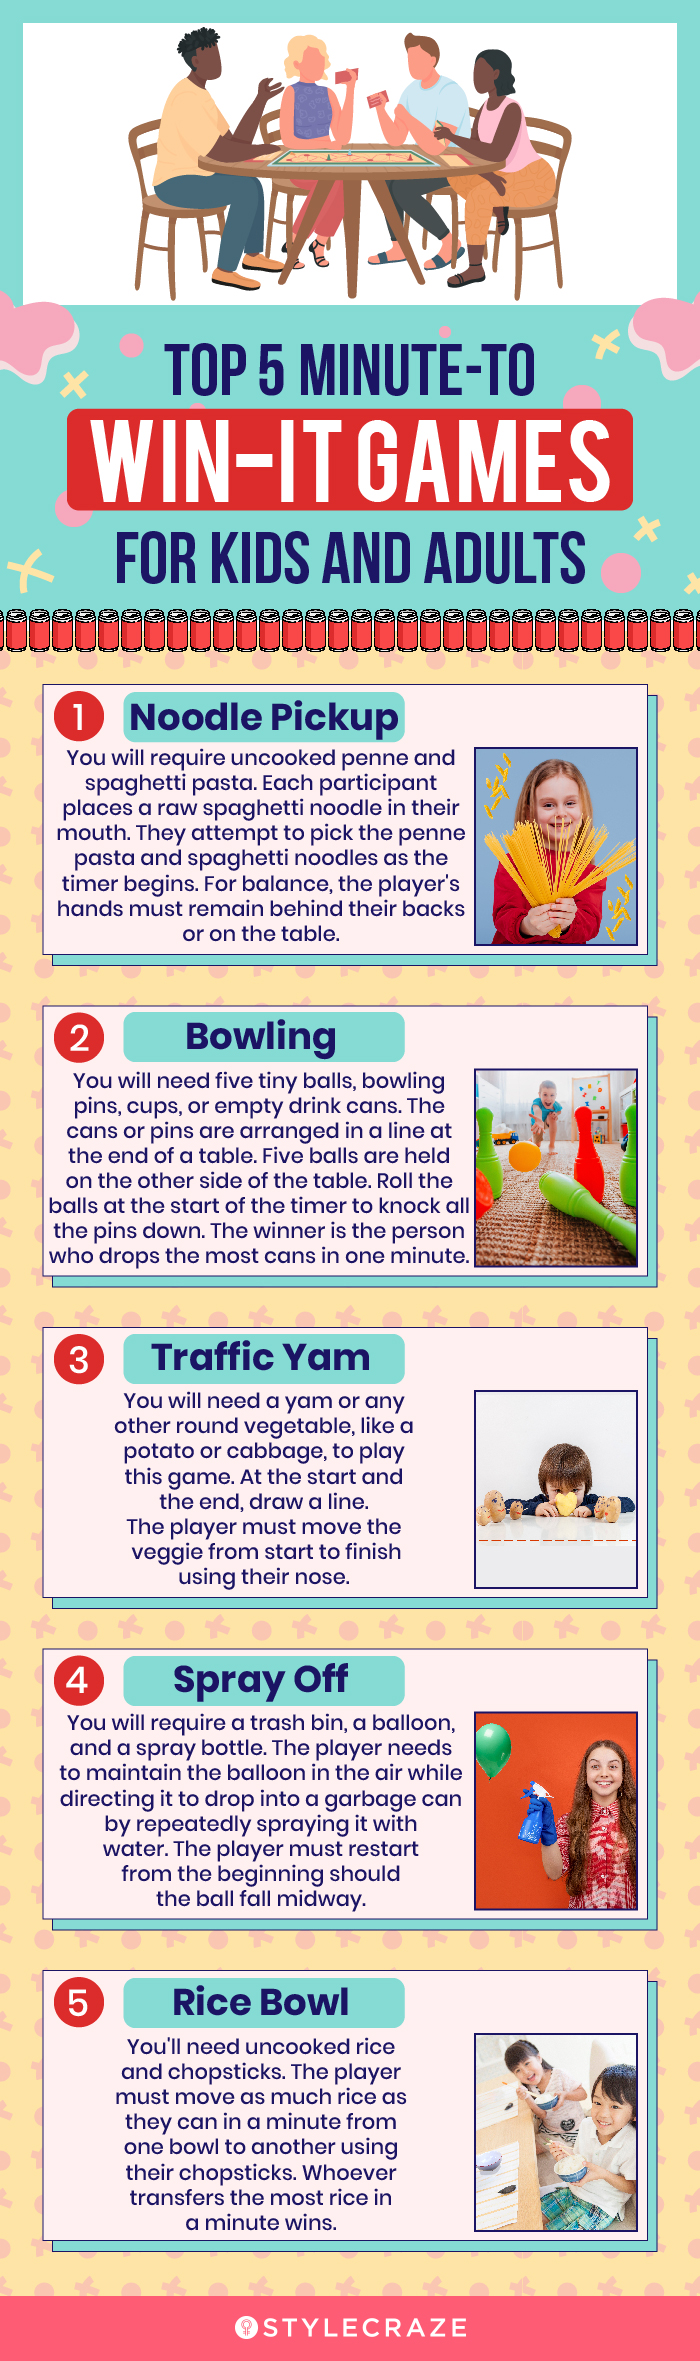 top 5 minute to win it games for kids and adults (infographic)